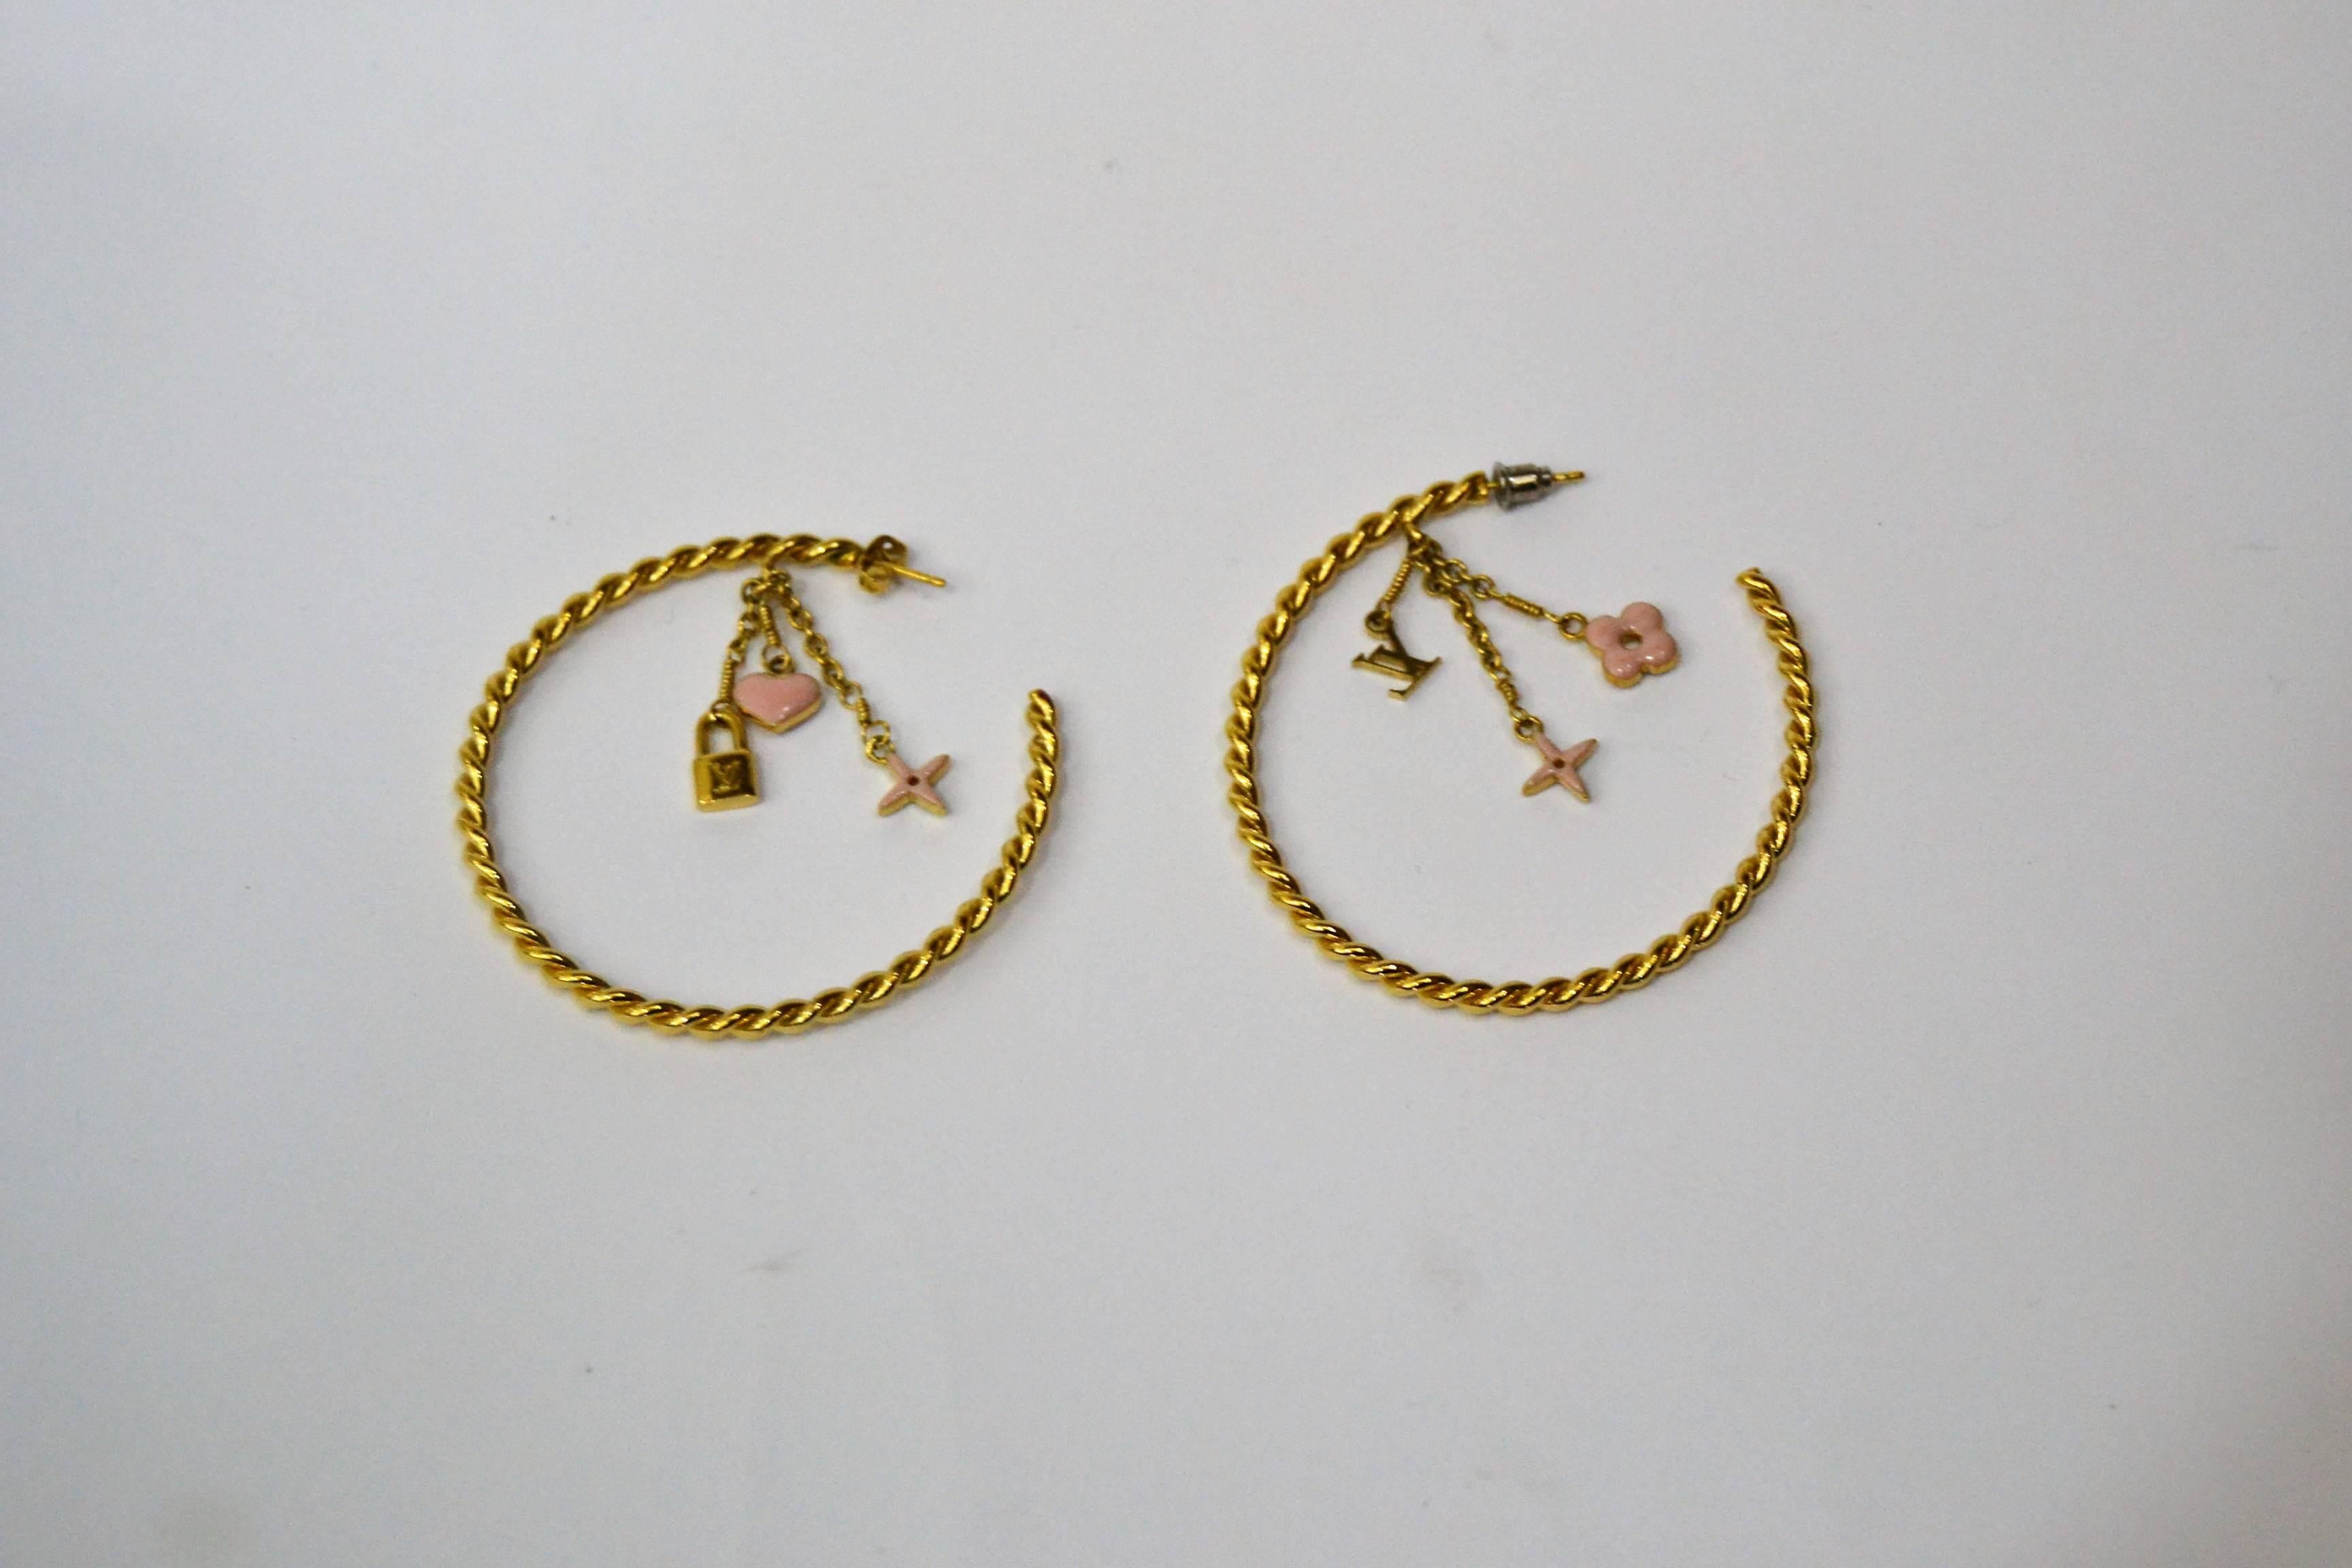 Gold-tone Louis Vuitton 'Sweet Monogram' hoop earrings with pink enamel charms and clutch backings. Includes jewelry pouch.
Metal Type: Gold-Toned Metal
Metal Finish: High Polish
Non-Gem Materials: Enamel
Measurements: Drop 2